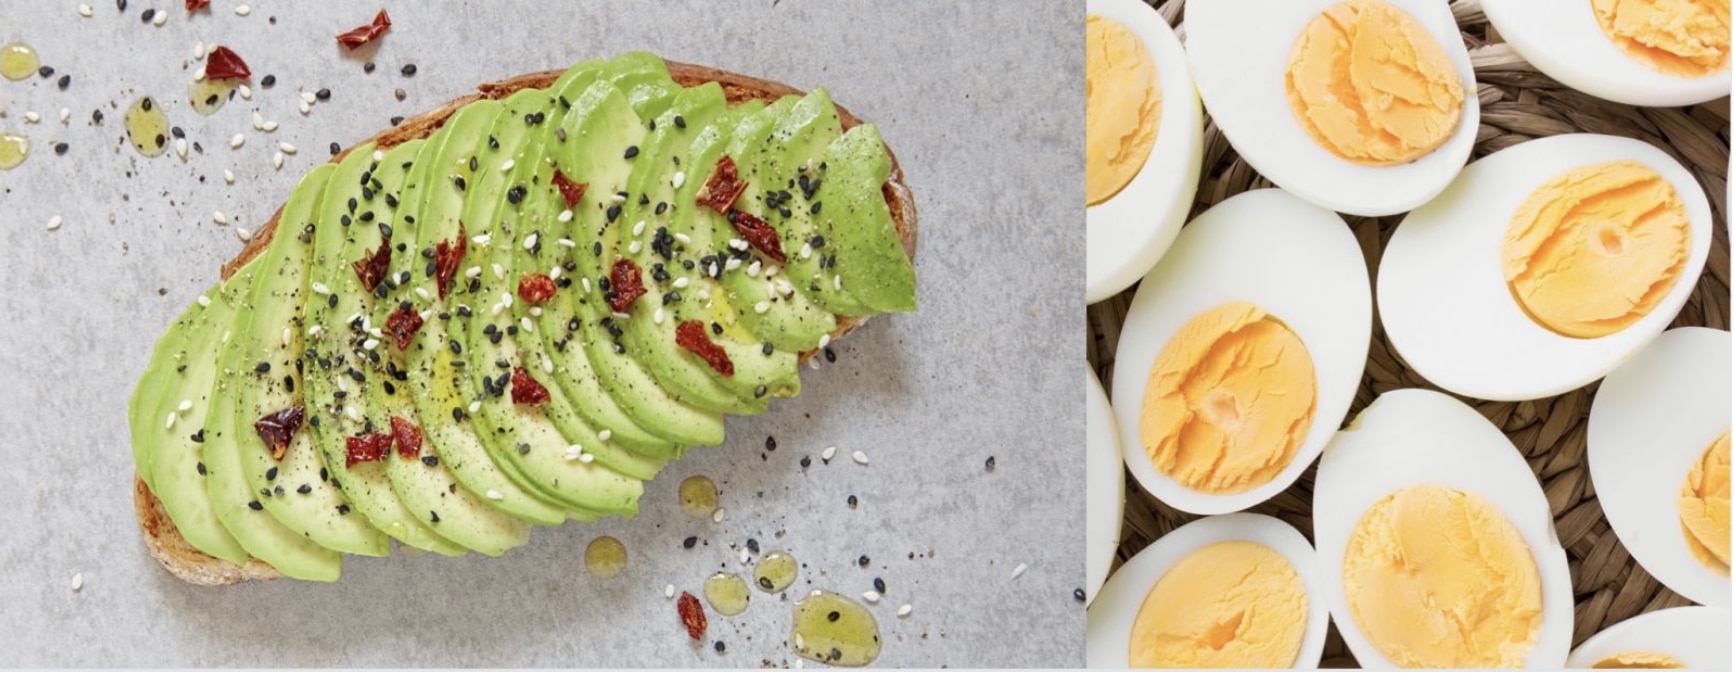 5-Minute Viral Avocado Toast With Egg Recipe